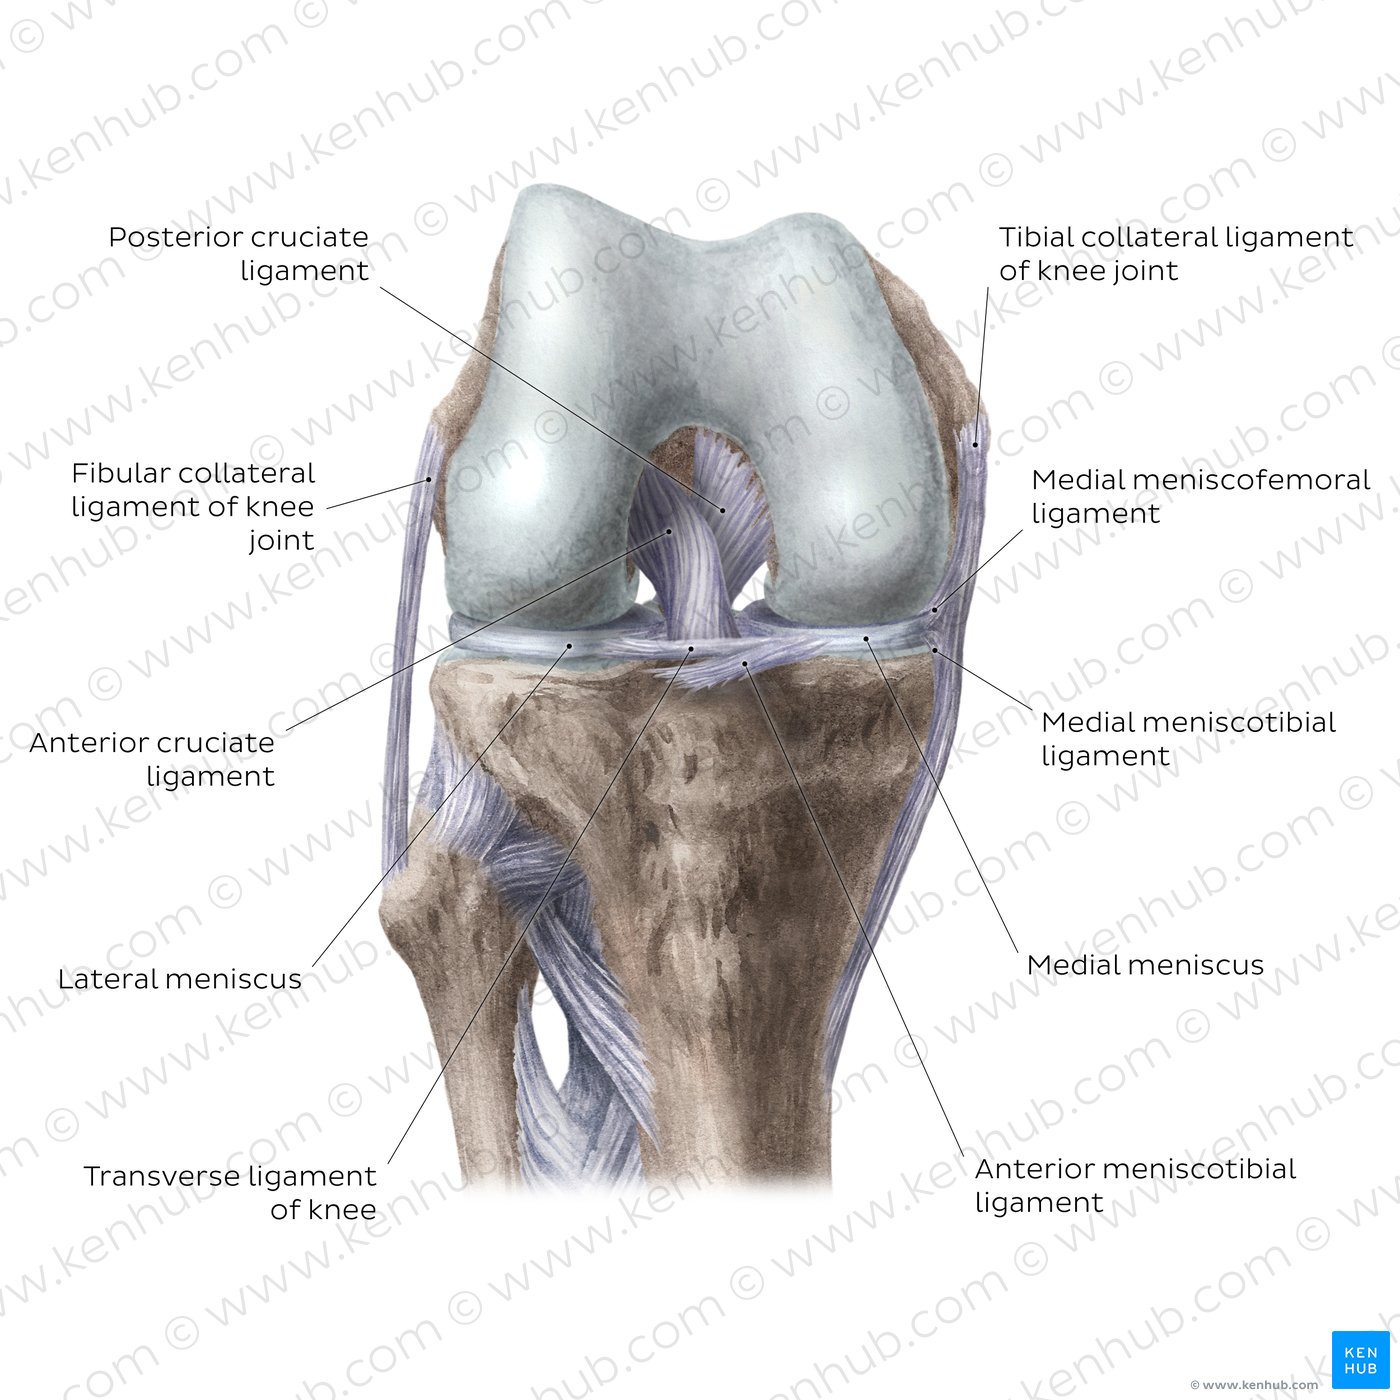 Knee joint: Intracapsular ligaments and menisci (anterior view)